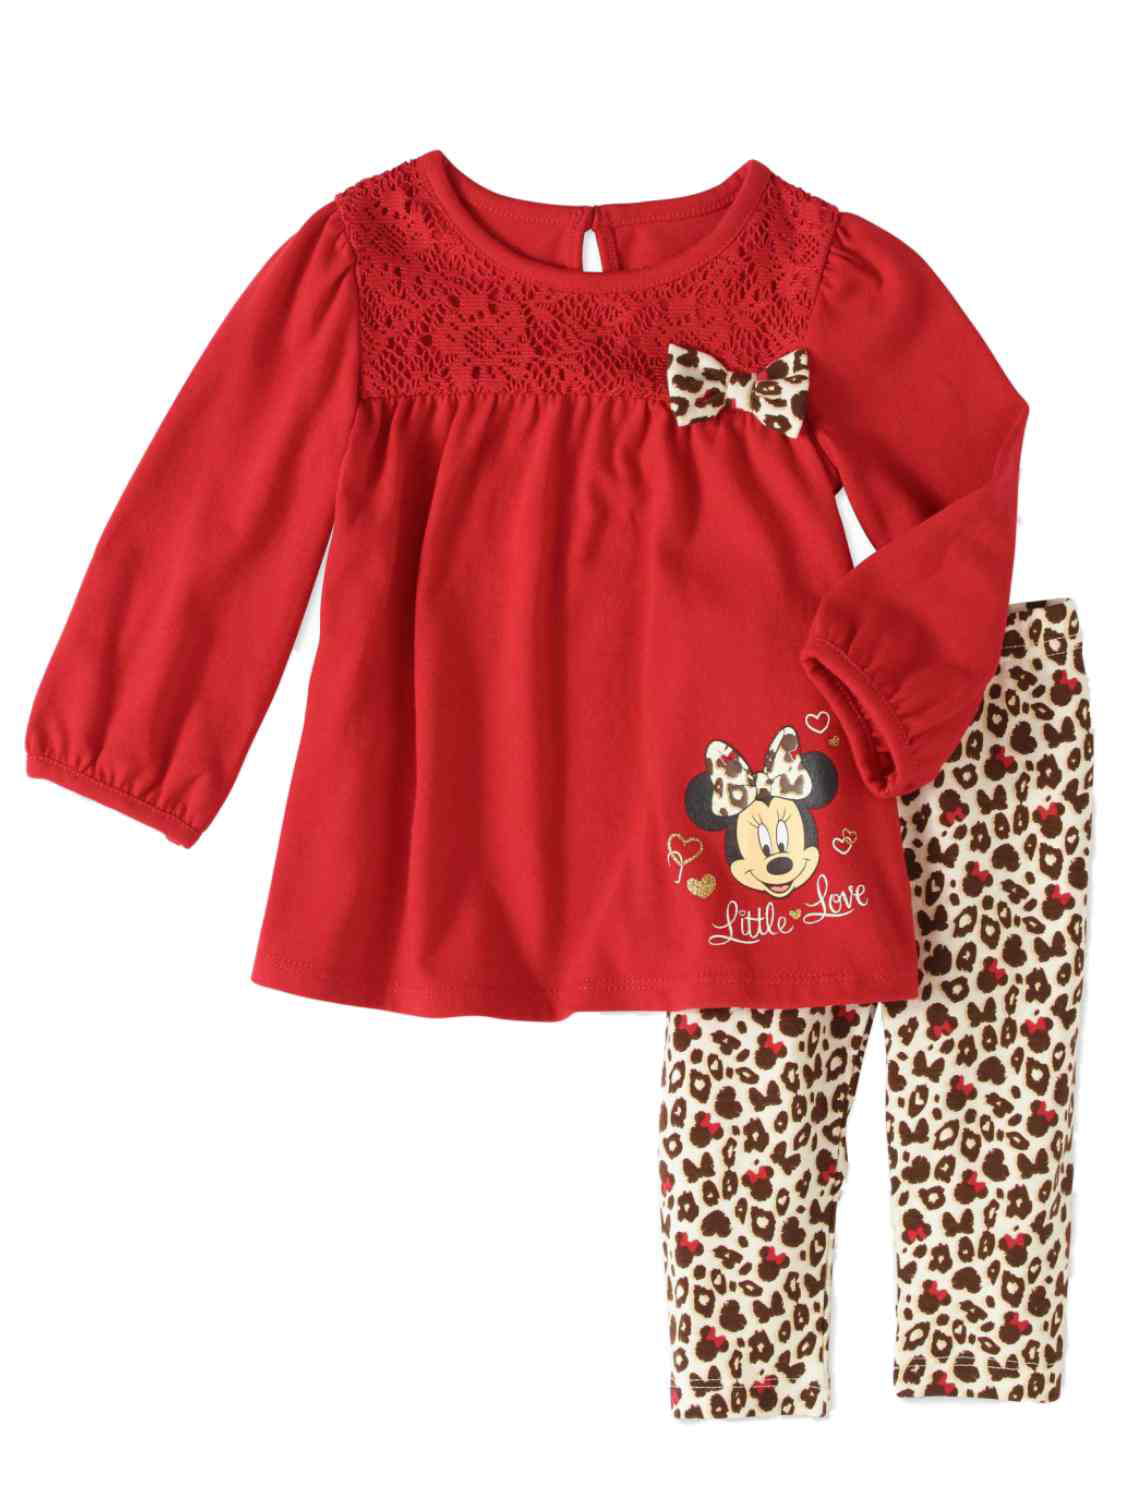 Youngland Infant Toddler Girls 2 PC Scottie Dog Dress Outfit Jumper Shirt 